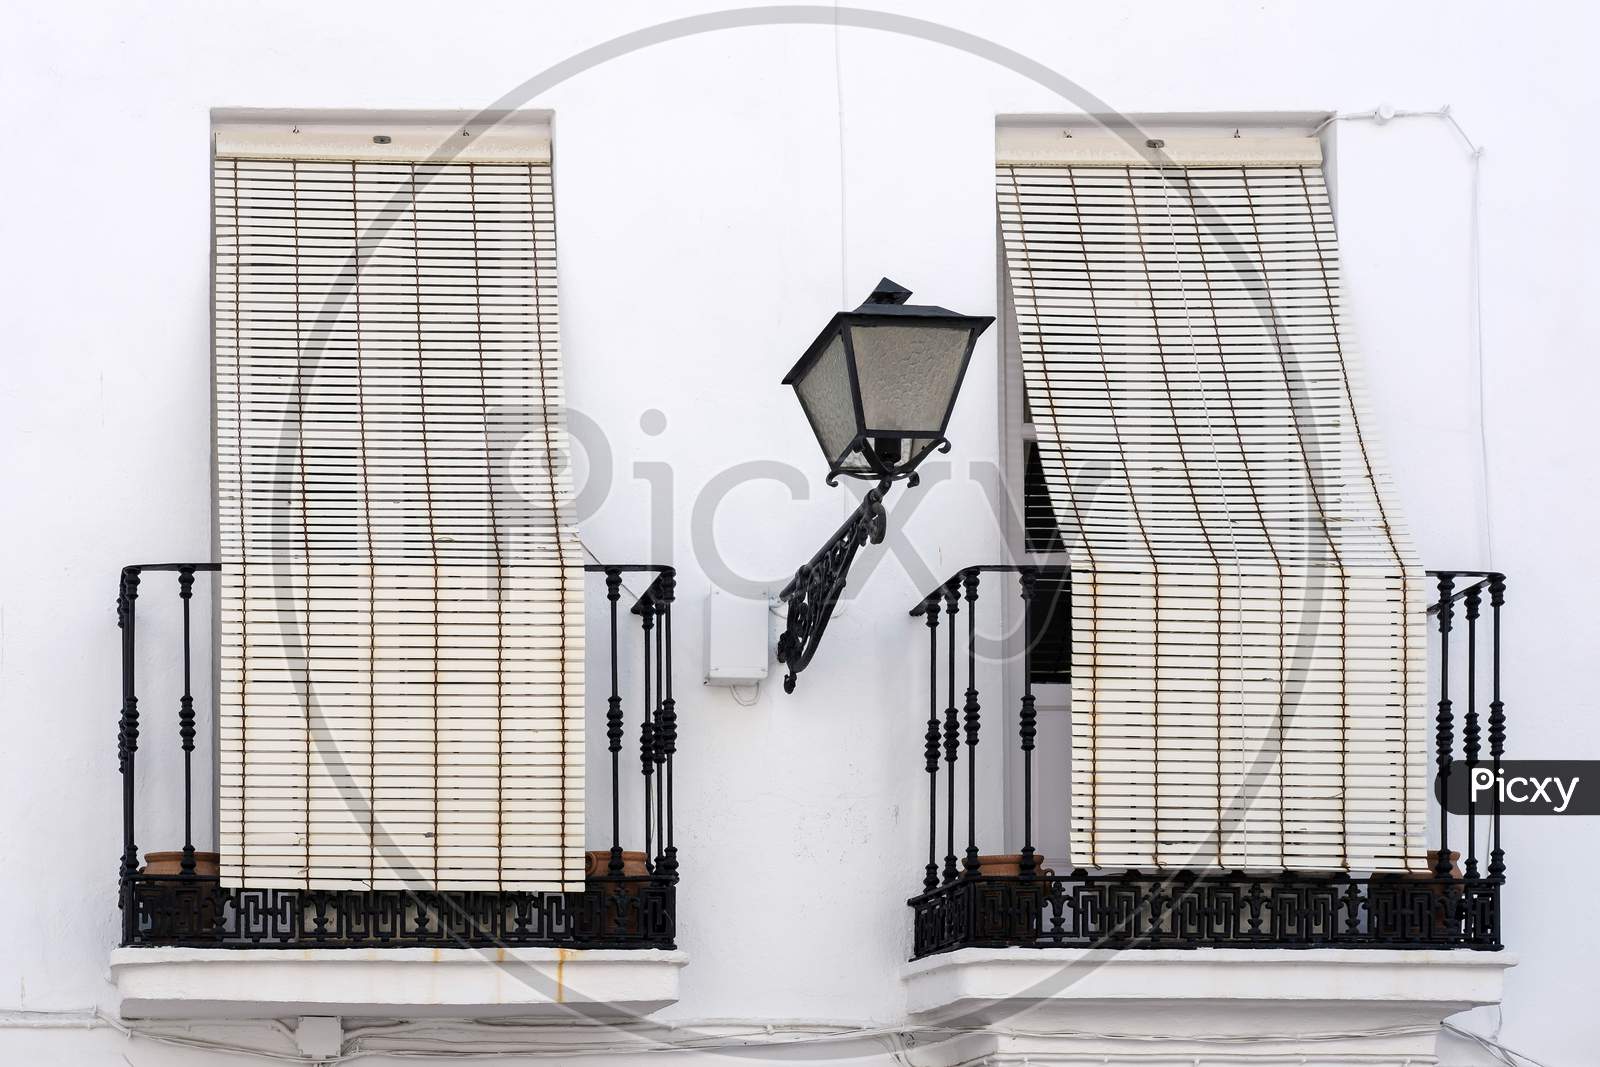 Blinds Over Balconies In The Old Town Of Marbella